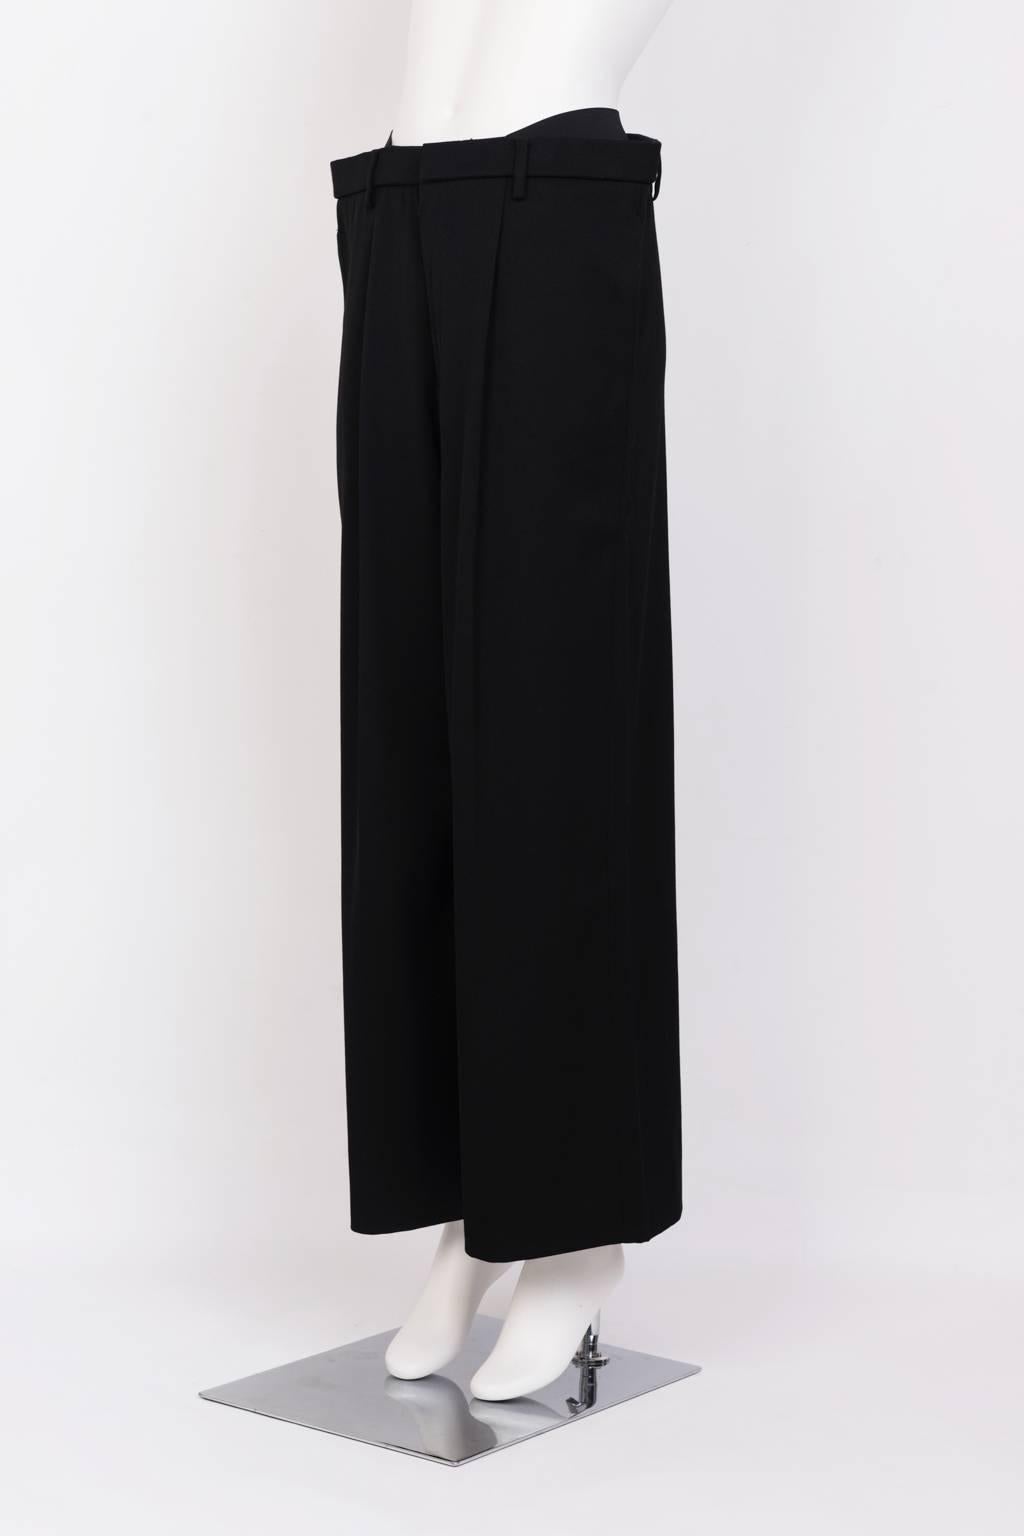 Tailored, single pleat, wide leg wool trouser with slash pockets. From the designer's noted 'Wardrobe' Collection.